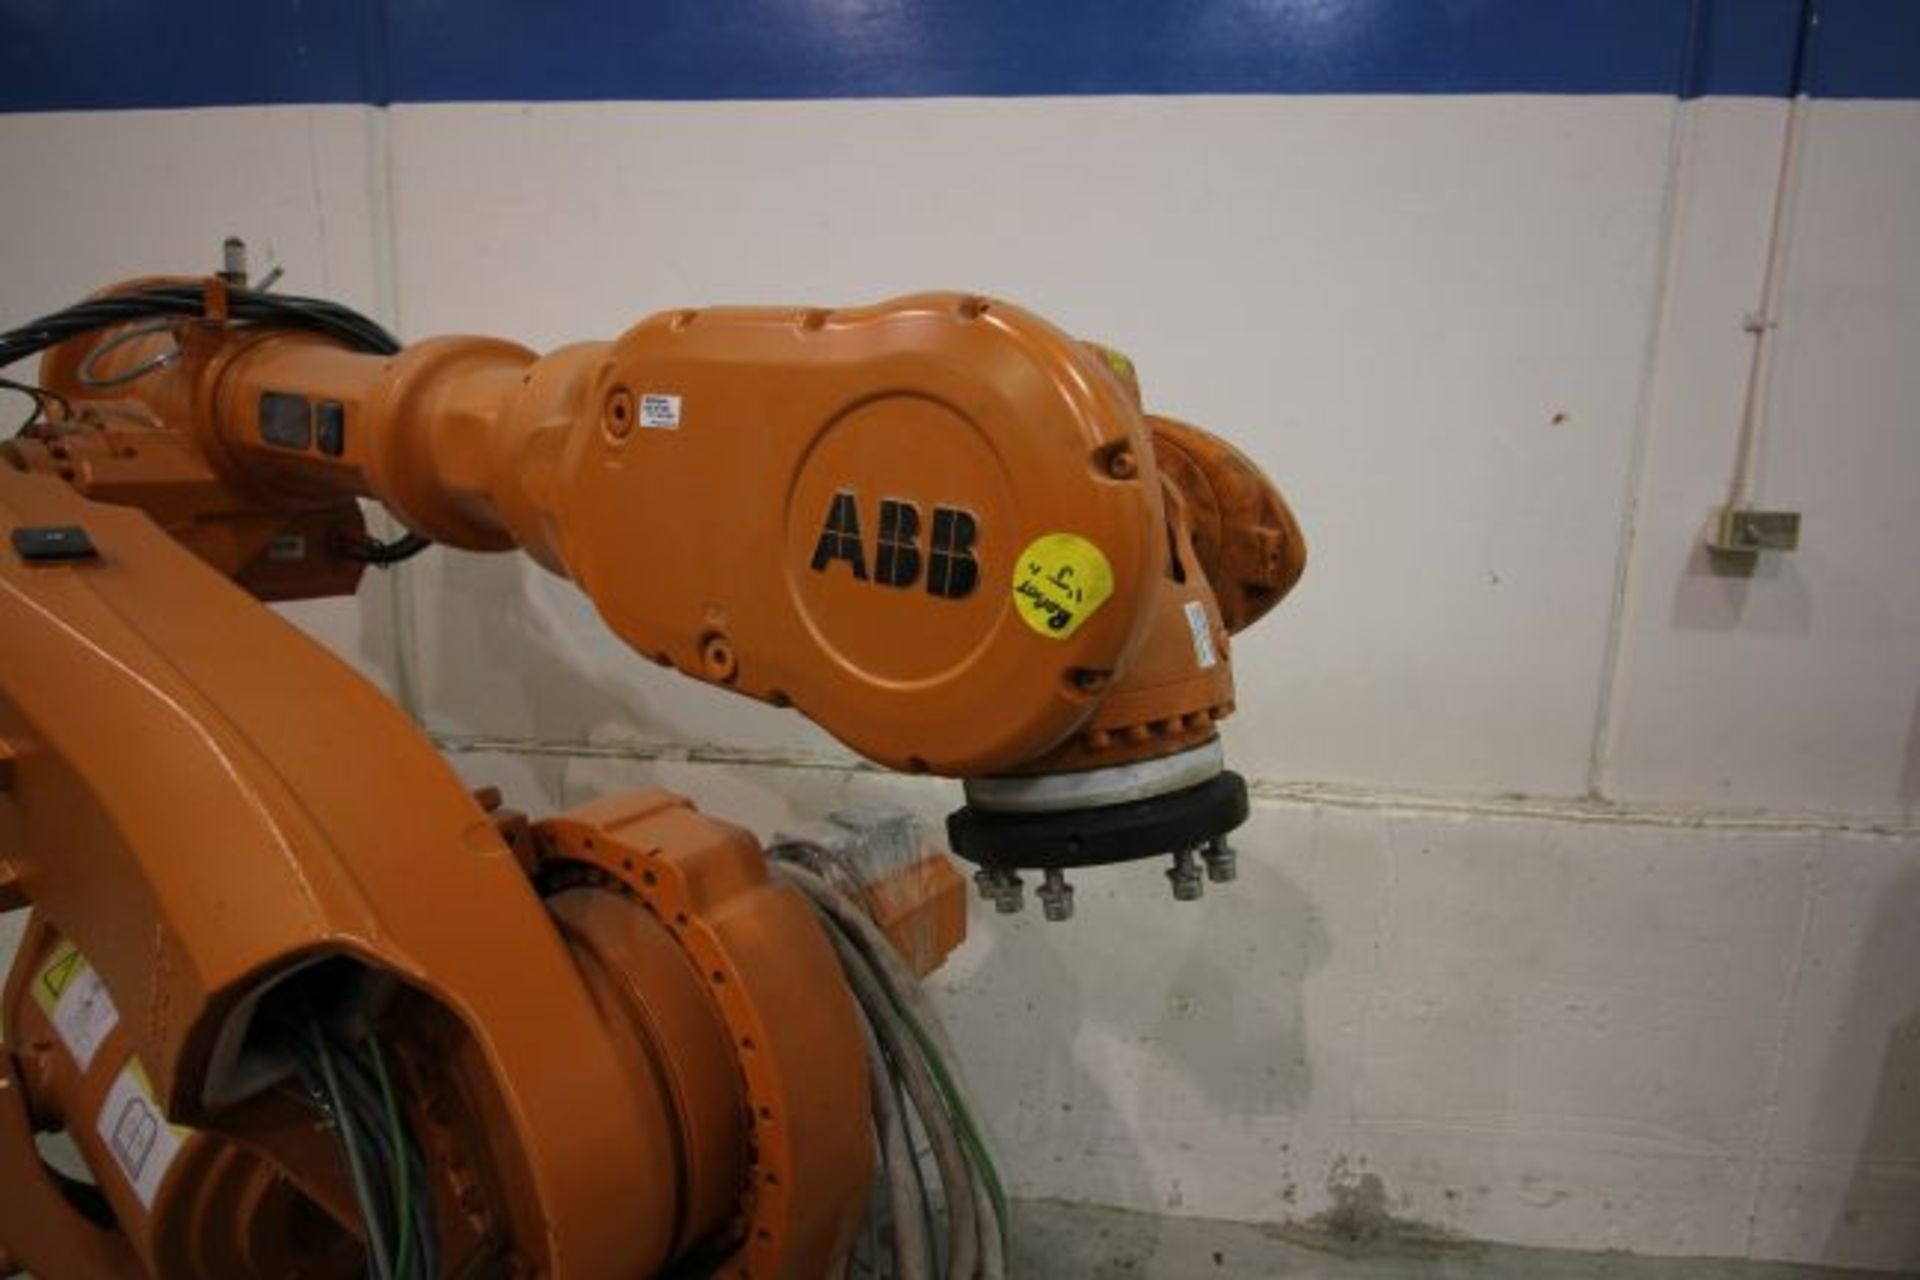 ABB ROBOT IRB 6640 2.8/185 WITH IRC5 CONTROLS, YEAR 2014, SN 106843, TEACH PENDANT & CABLES - Image 3 of 11